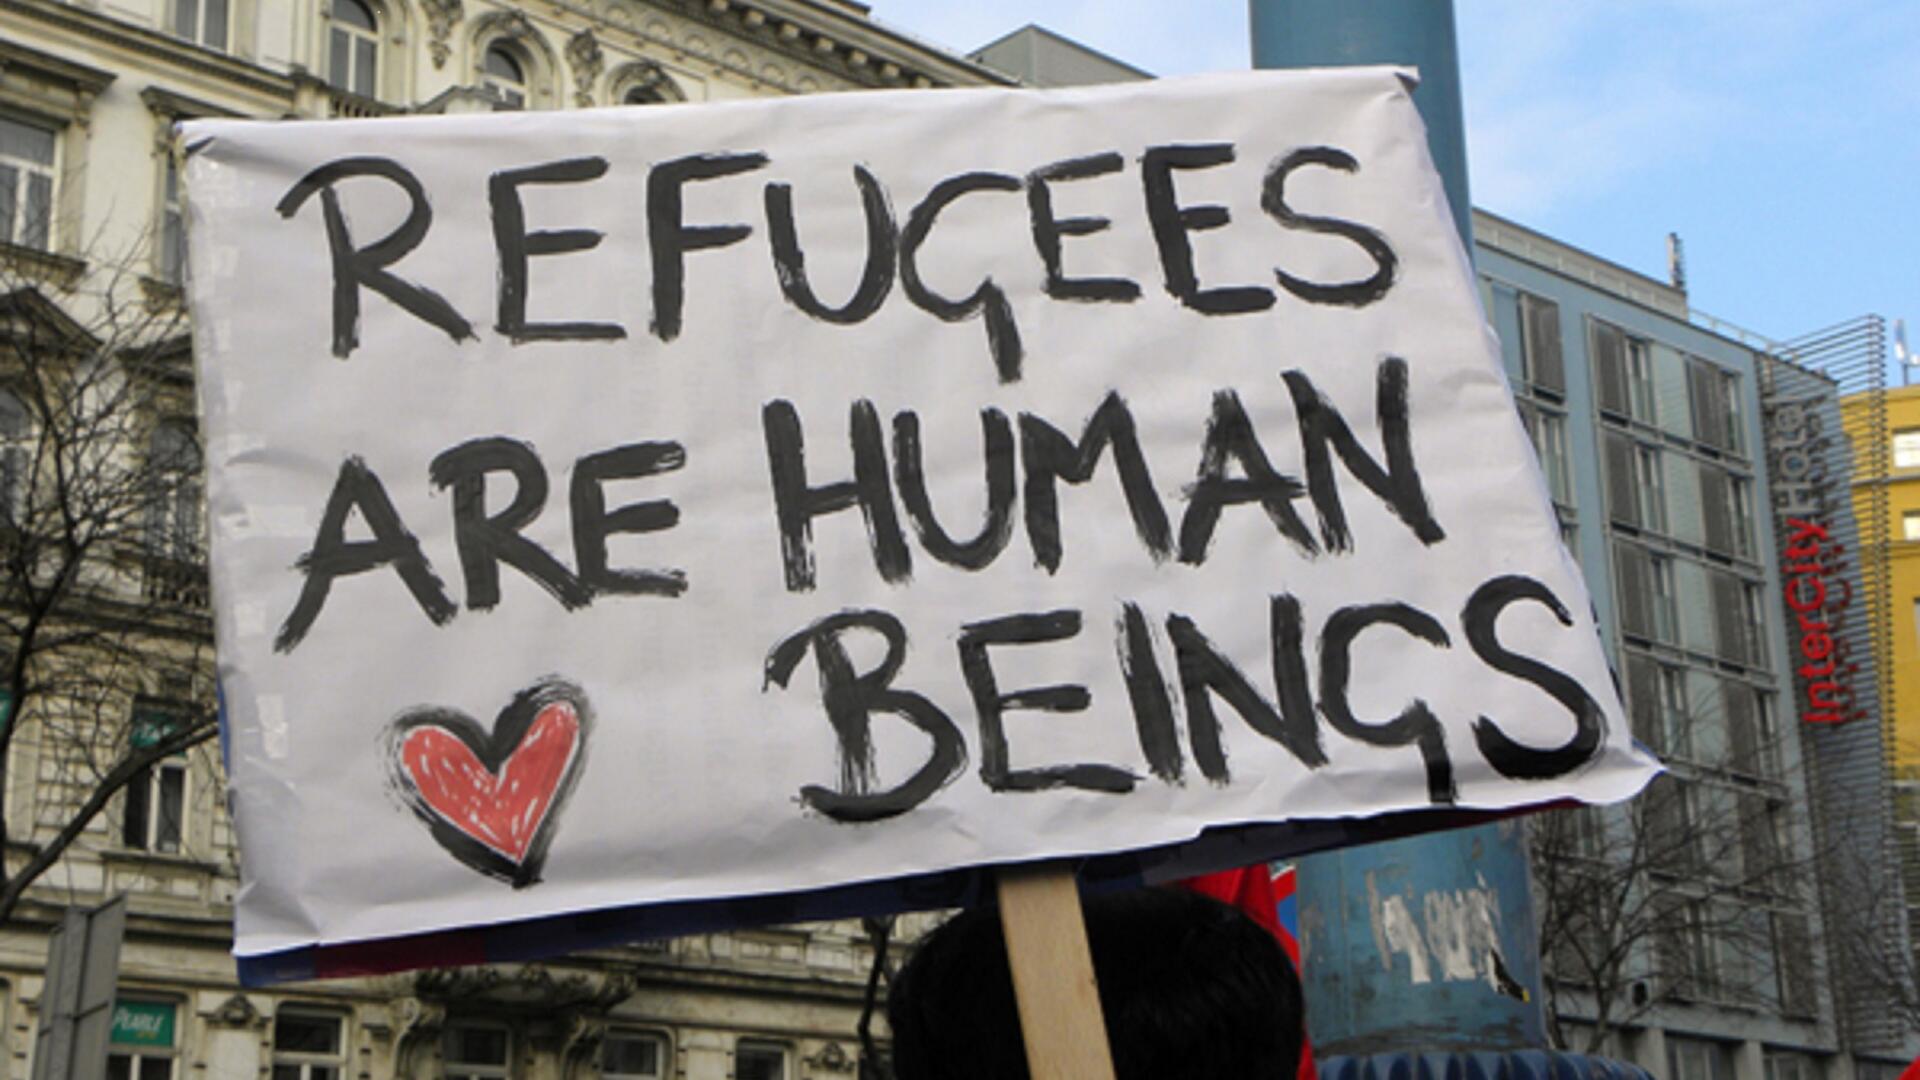 Refugees are human beings.jpg